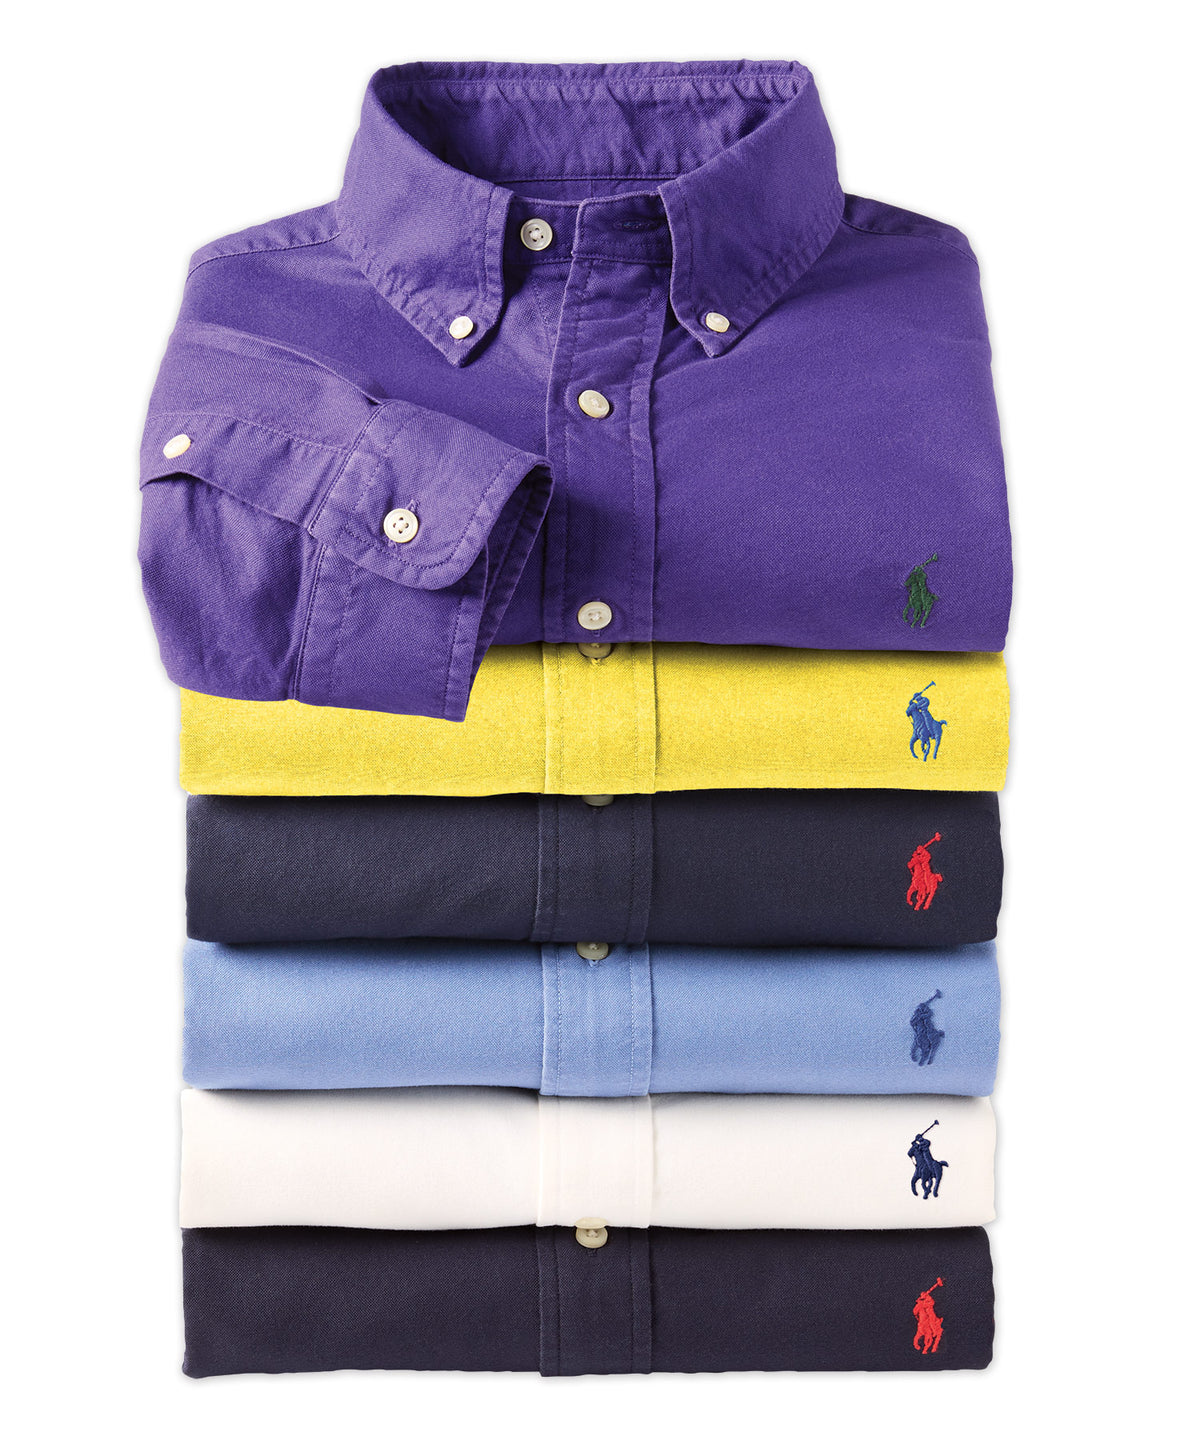 outlet online sale 4 3XB Ralph Lauren Polo oxfords new and like new